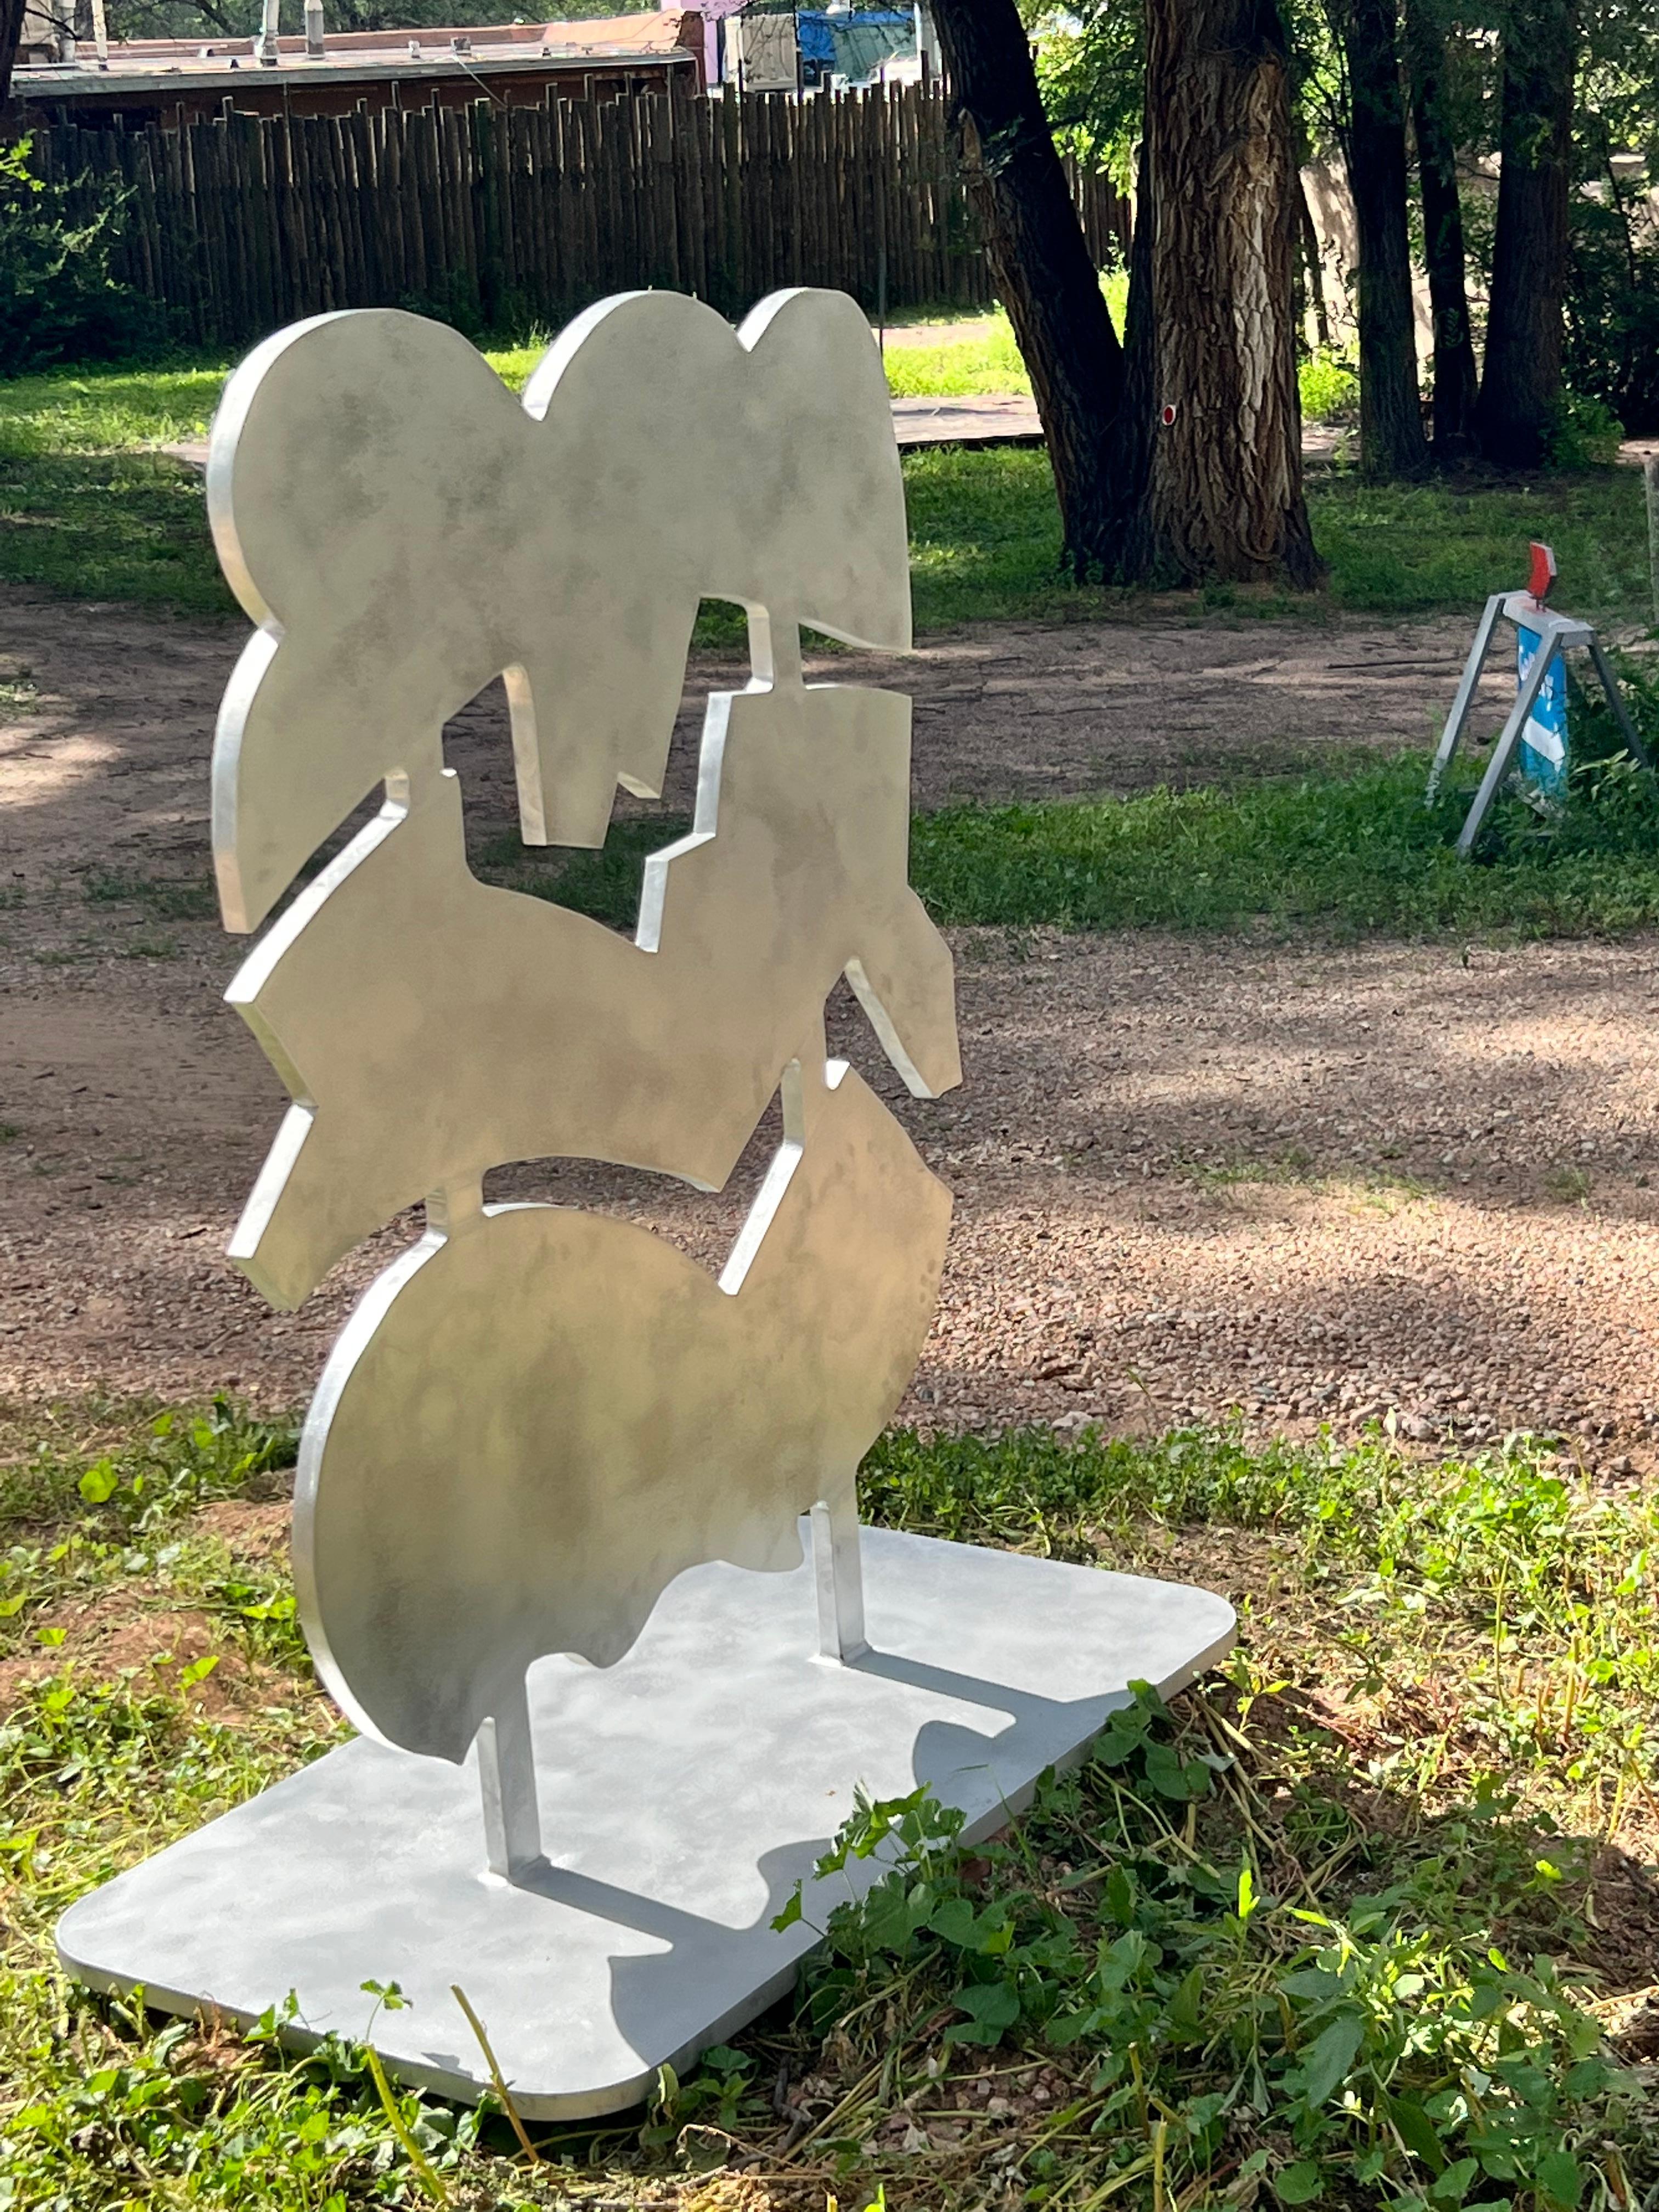 Cloudy, aluminum, sculpture, by Kerry Green, silver, clouds, stacked, outdoor

limited edition of 8

signed and numbered by the artist on the base

Since childhood, Kerry Green has always been creative; painting, drawing, sculpting, and sewing. Her